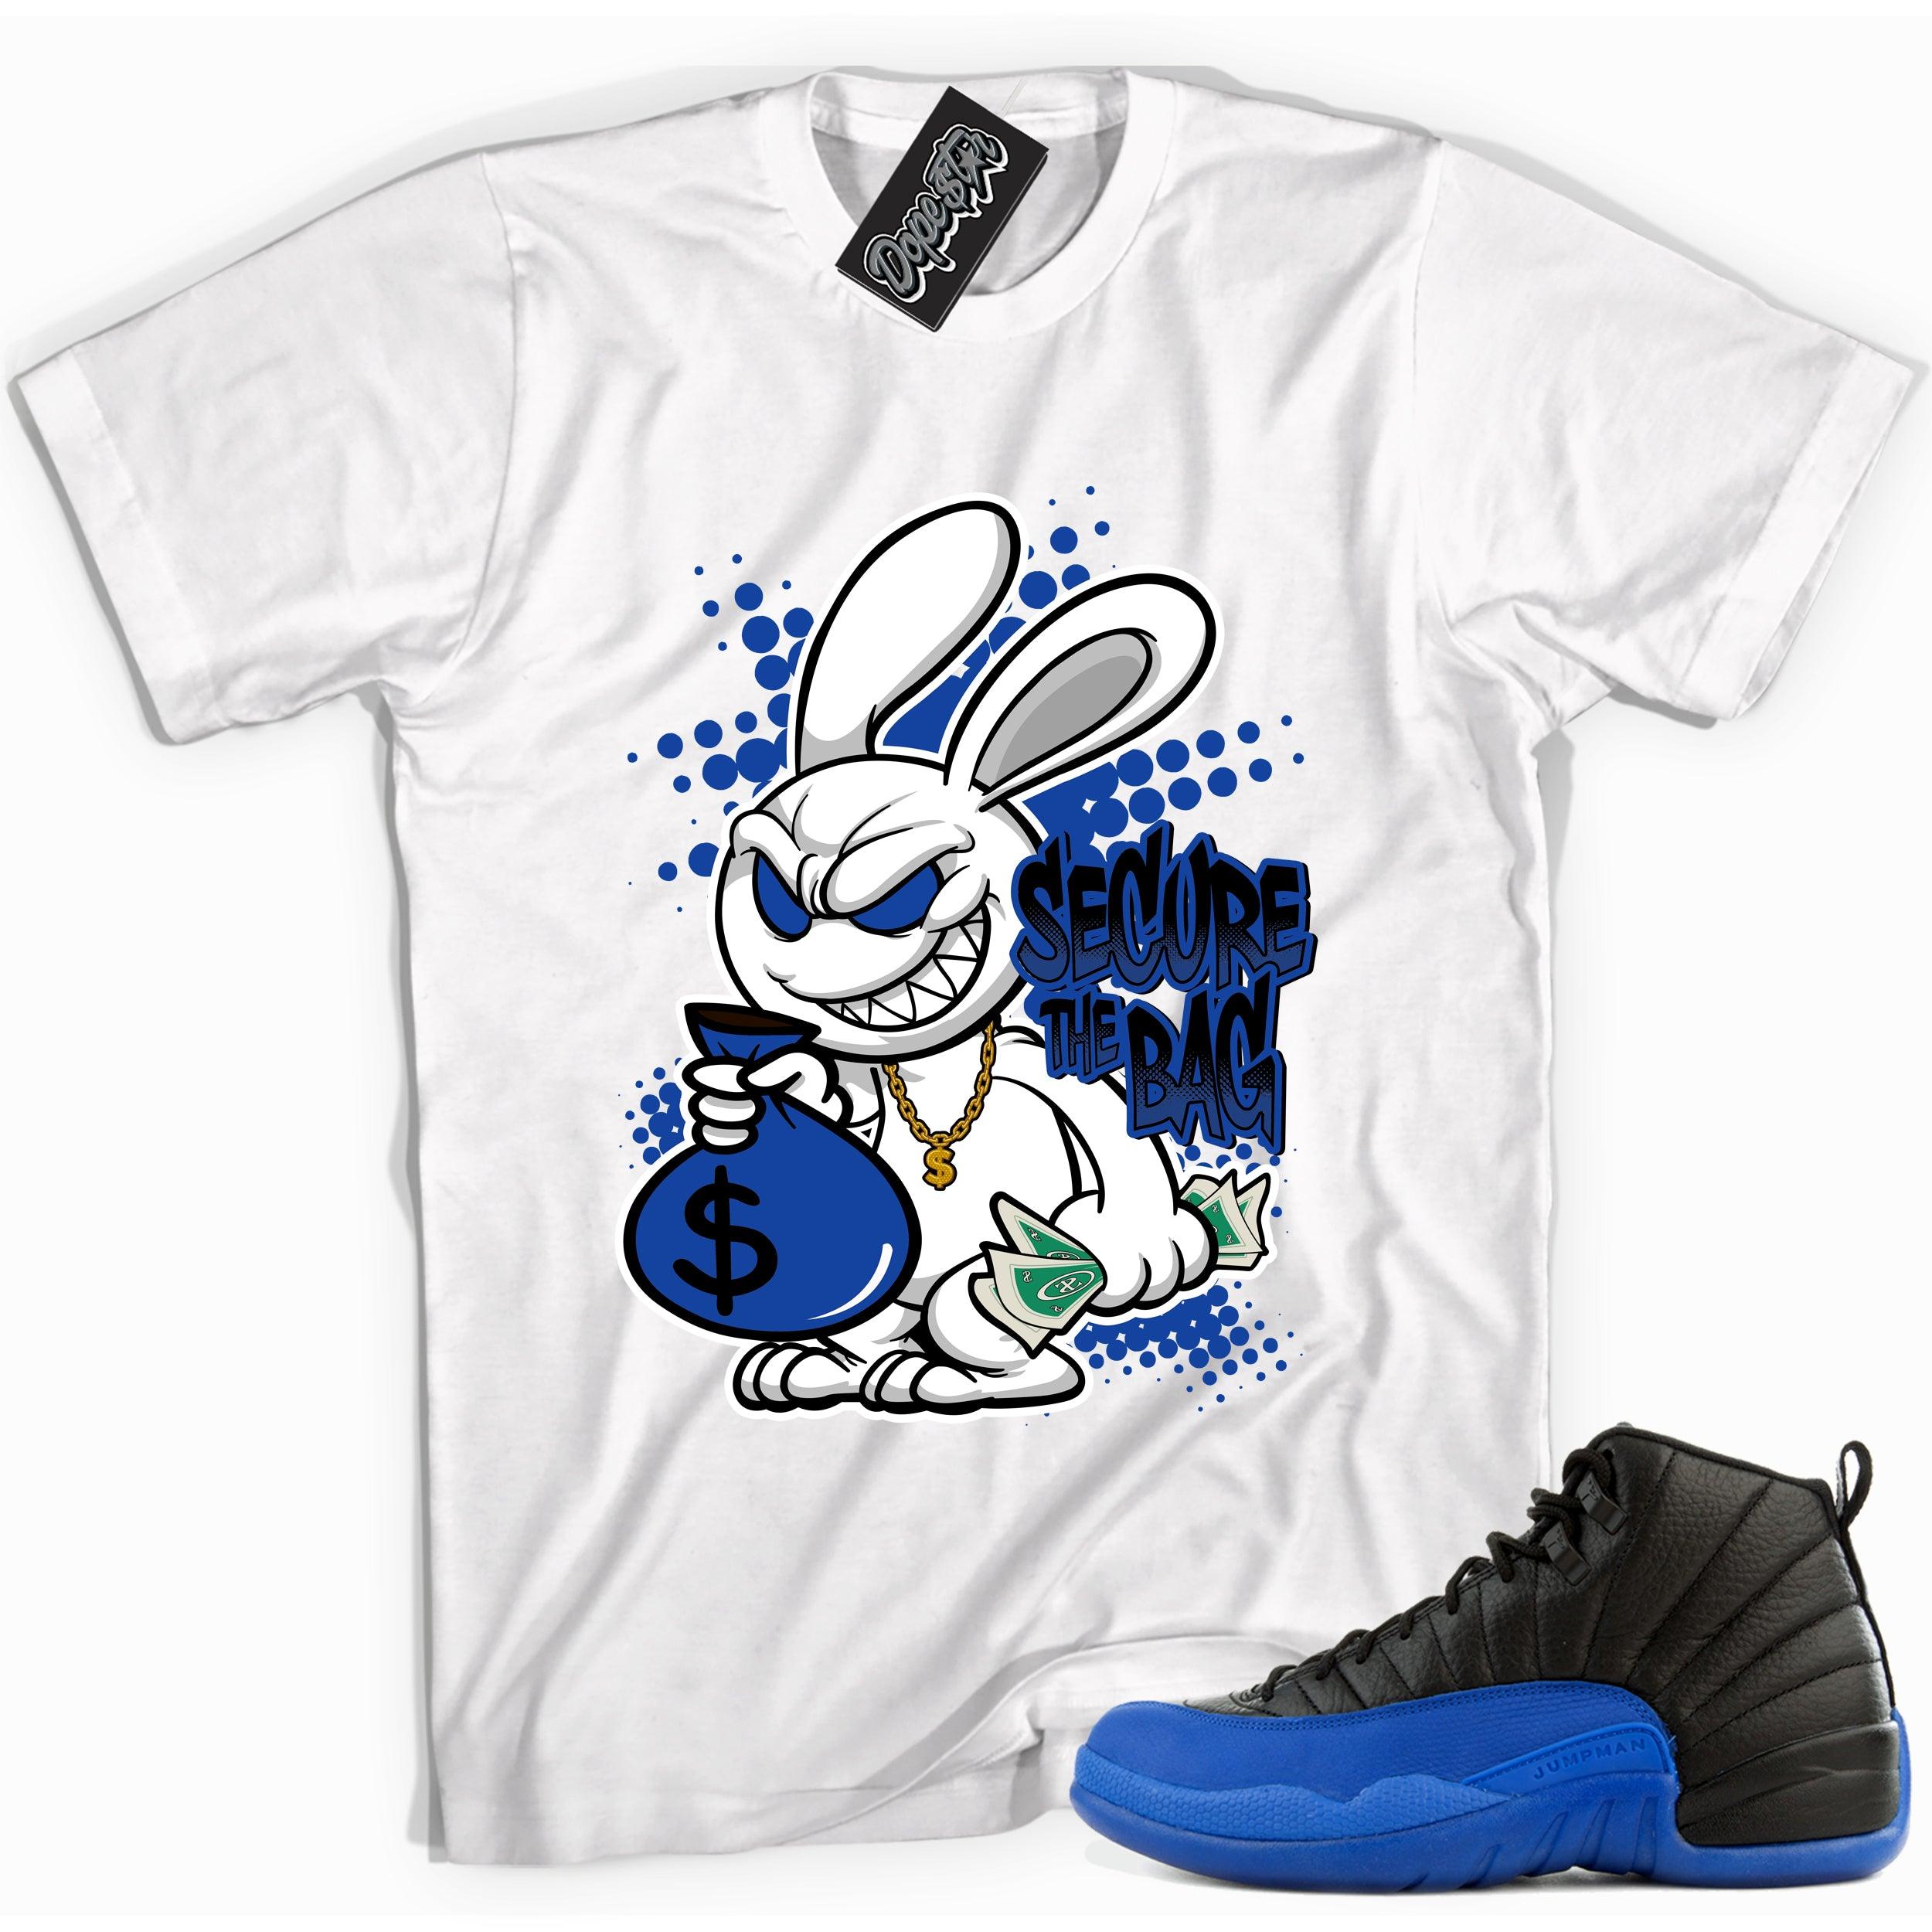 Cool white graphic tee with 'secure the bag' print, that perfectly matches Air Jordan 12 Retro Black Game Royal sneakers.